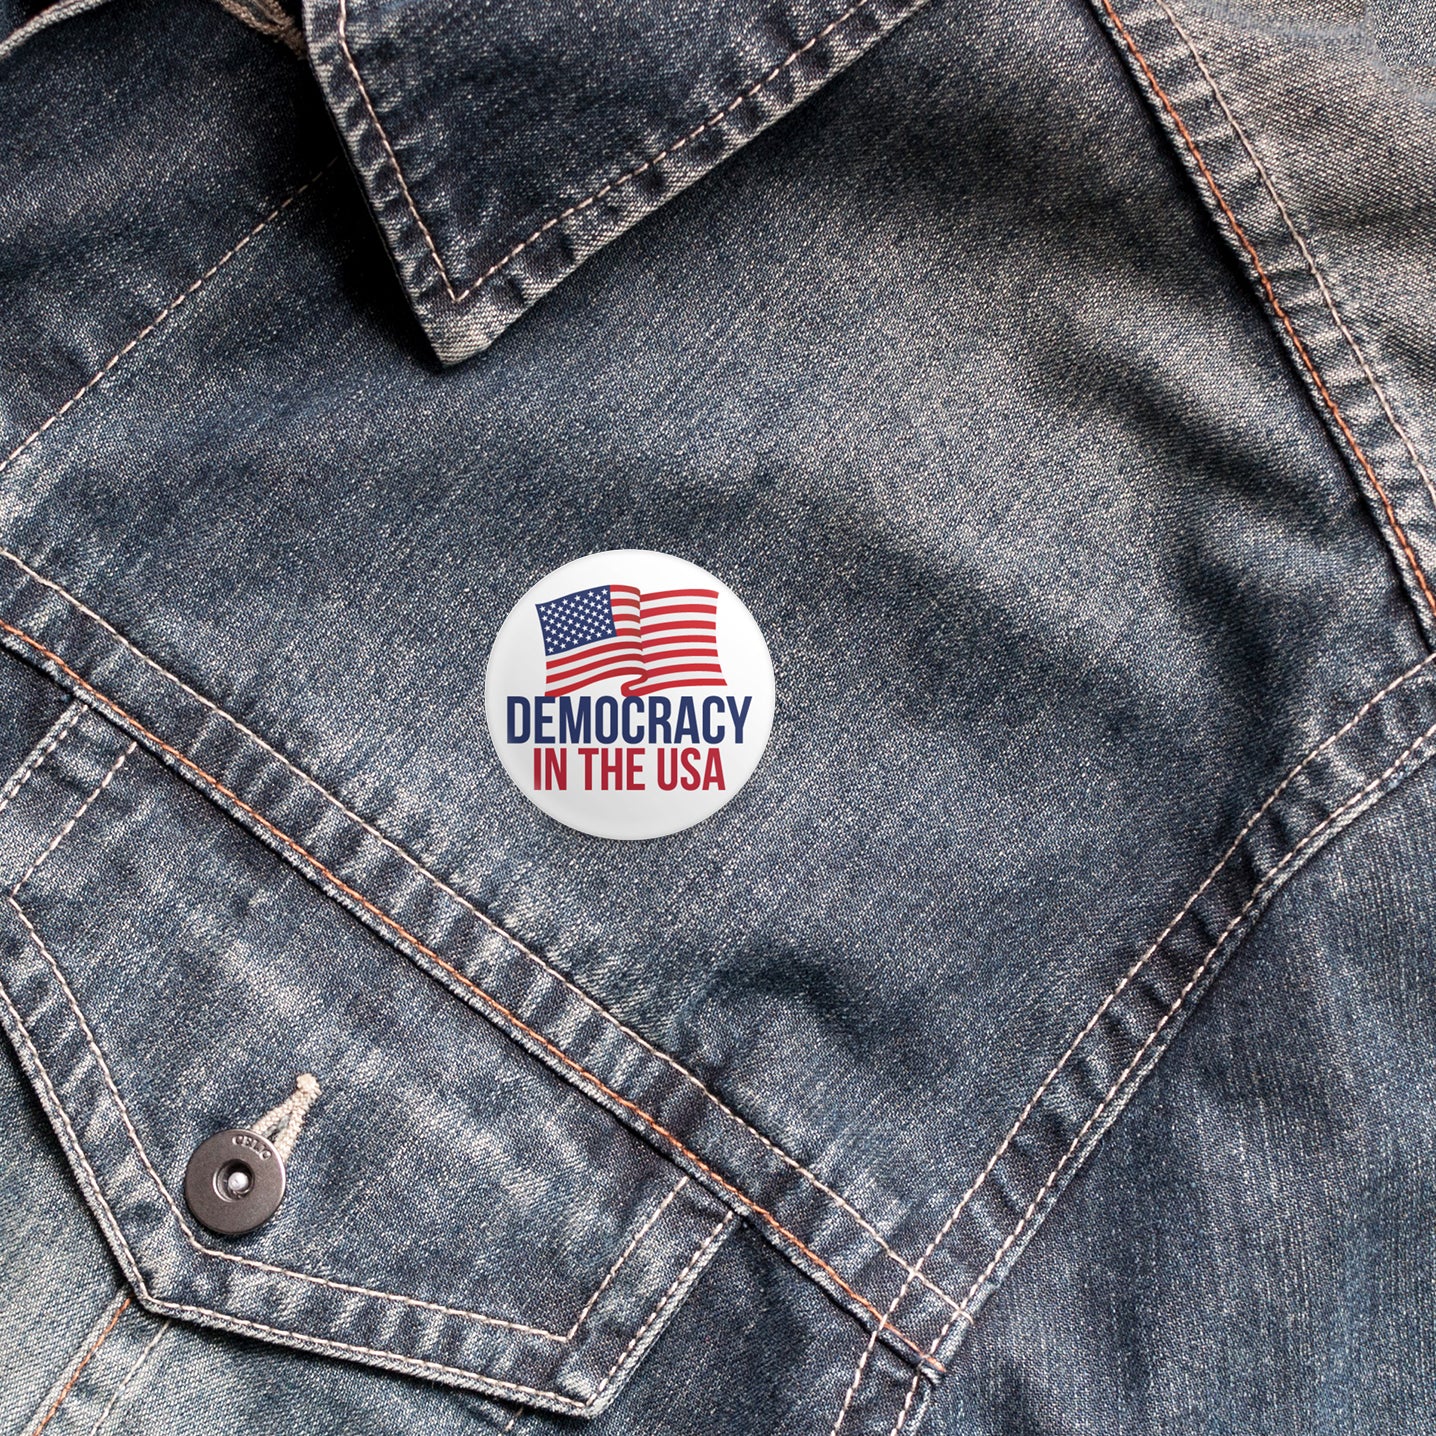 democracy in the usa button on denim jacket